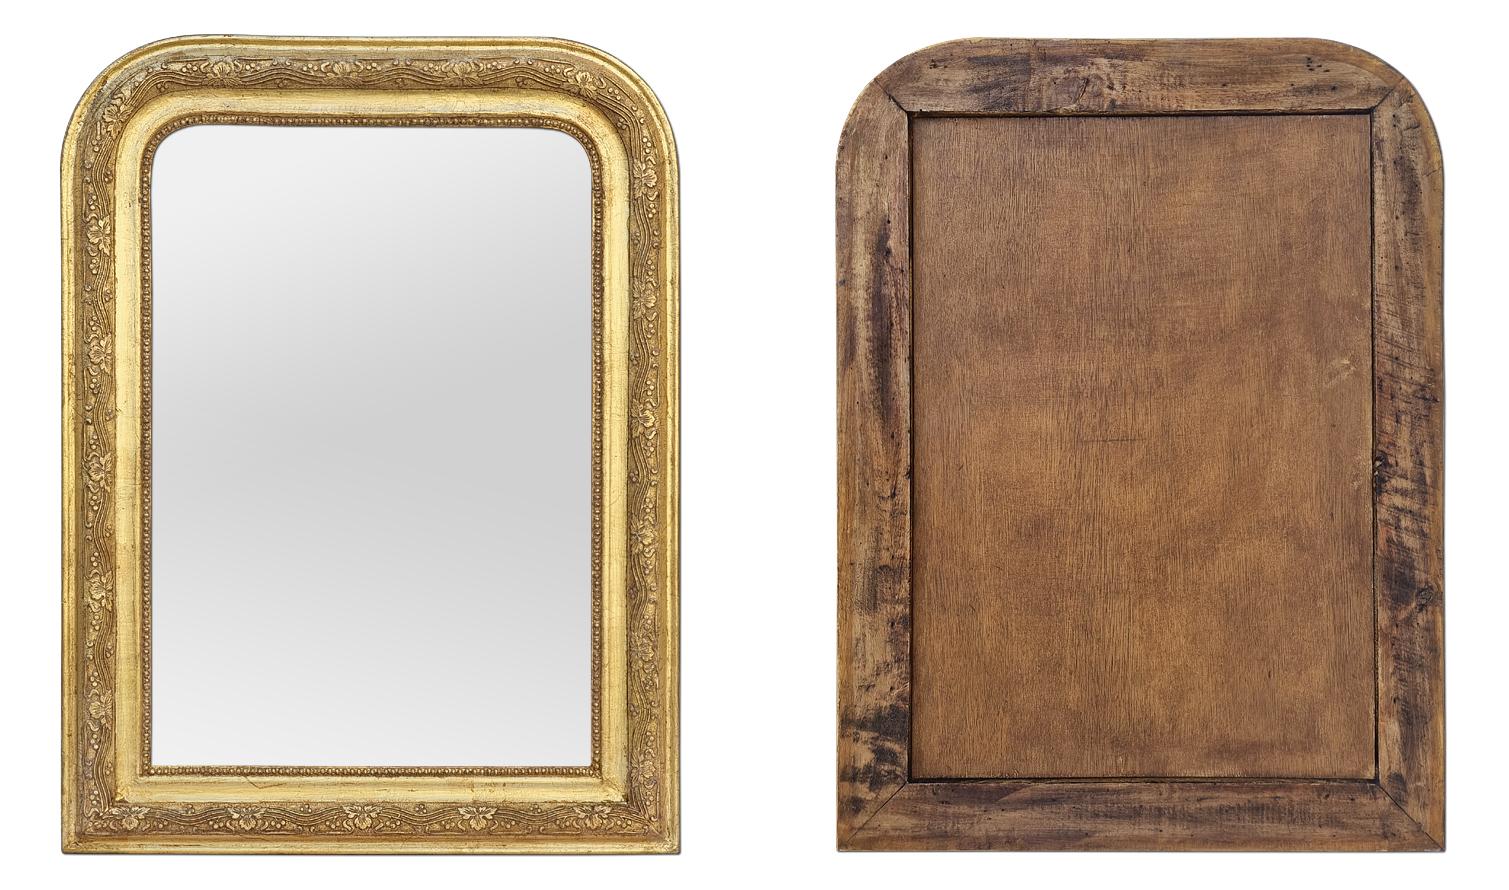 Antique French Giltwood Mirror, Louis-Philippe Style, circa 1930 For Sale 2